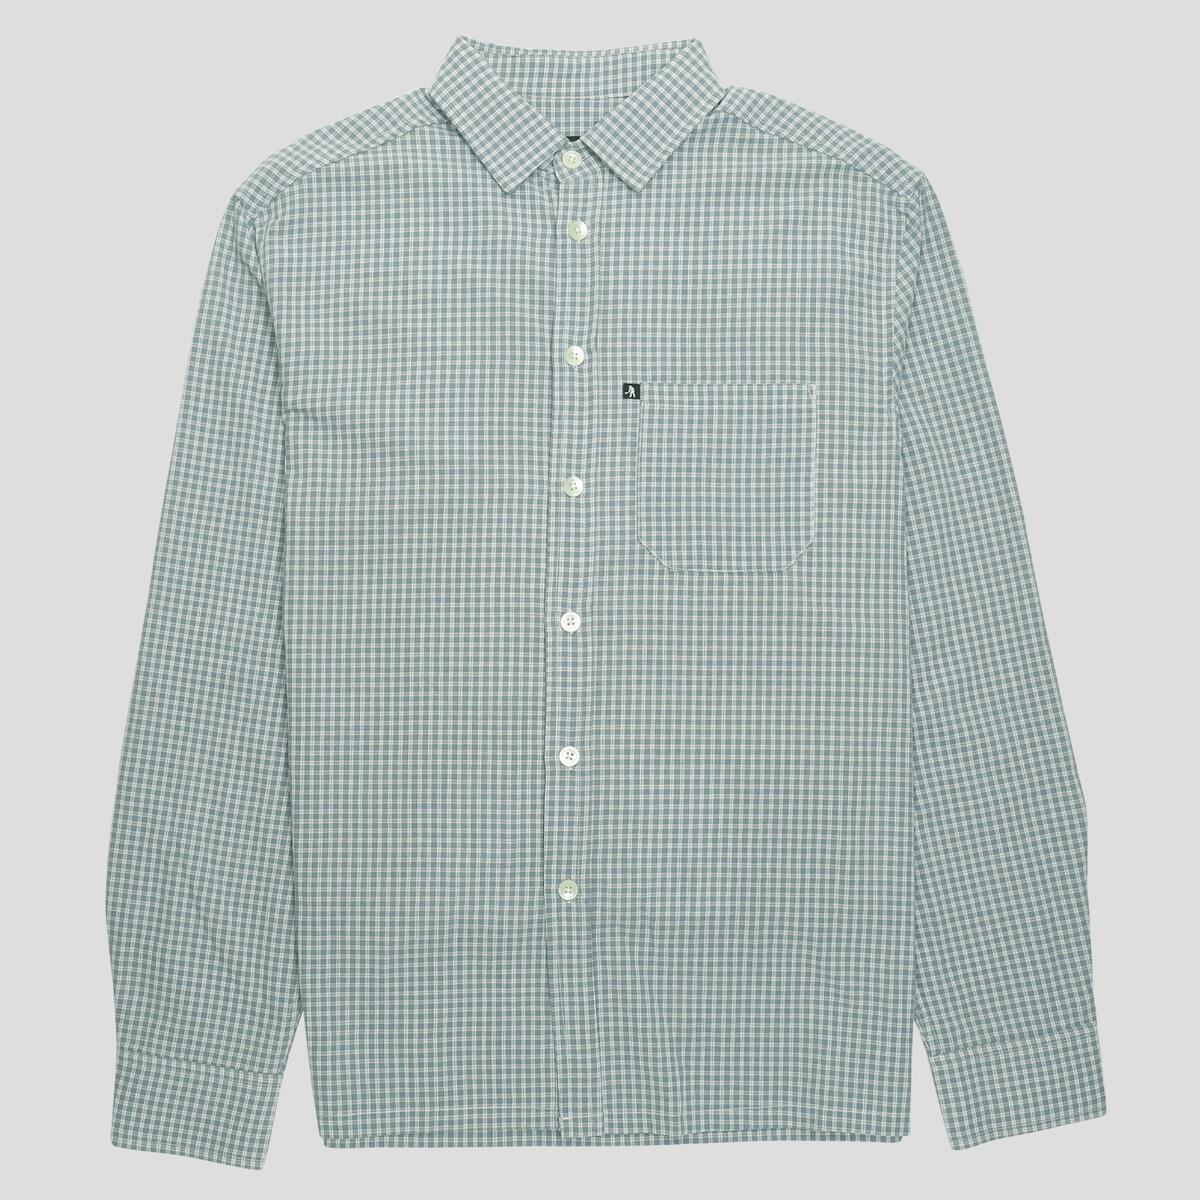 Workers Check Shirt LS (Teal)